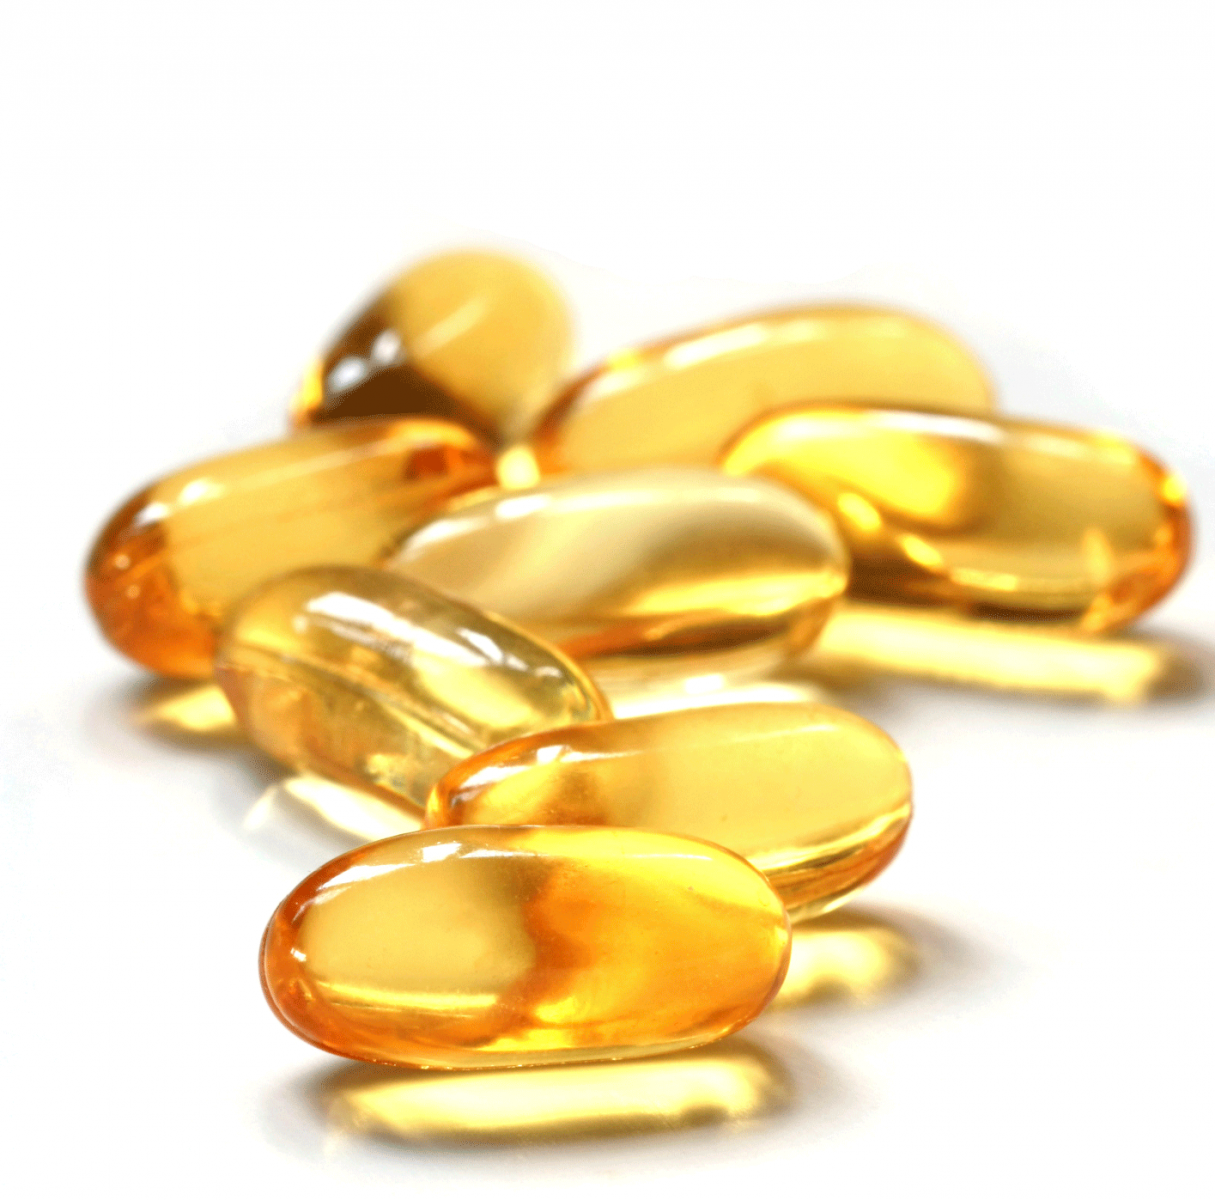 SUPPLEMENTS TO IMPROVE  ORAL HEALTH & REVERSE CAVITIES